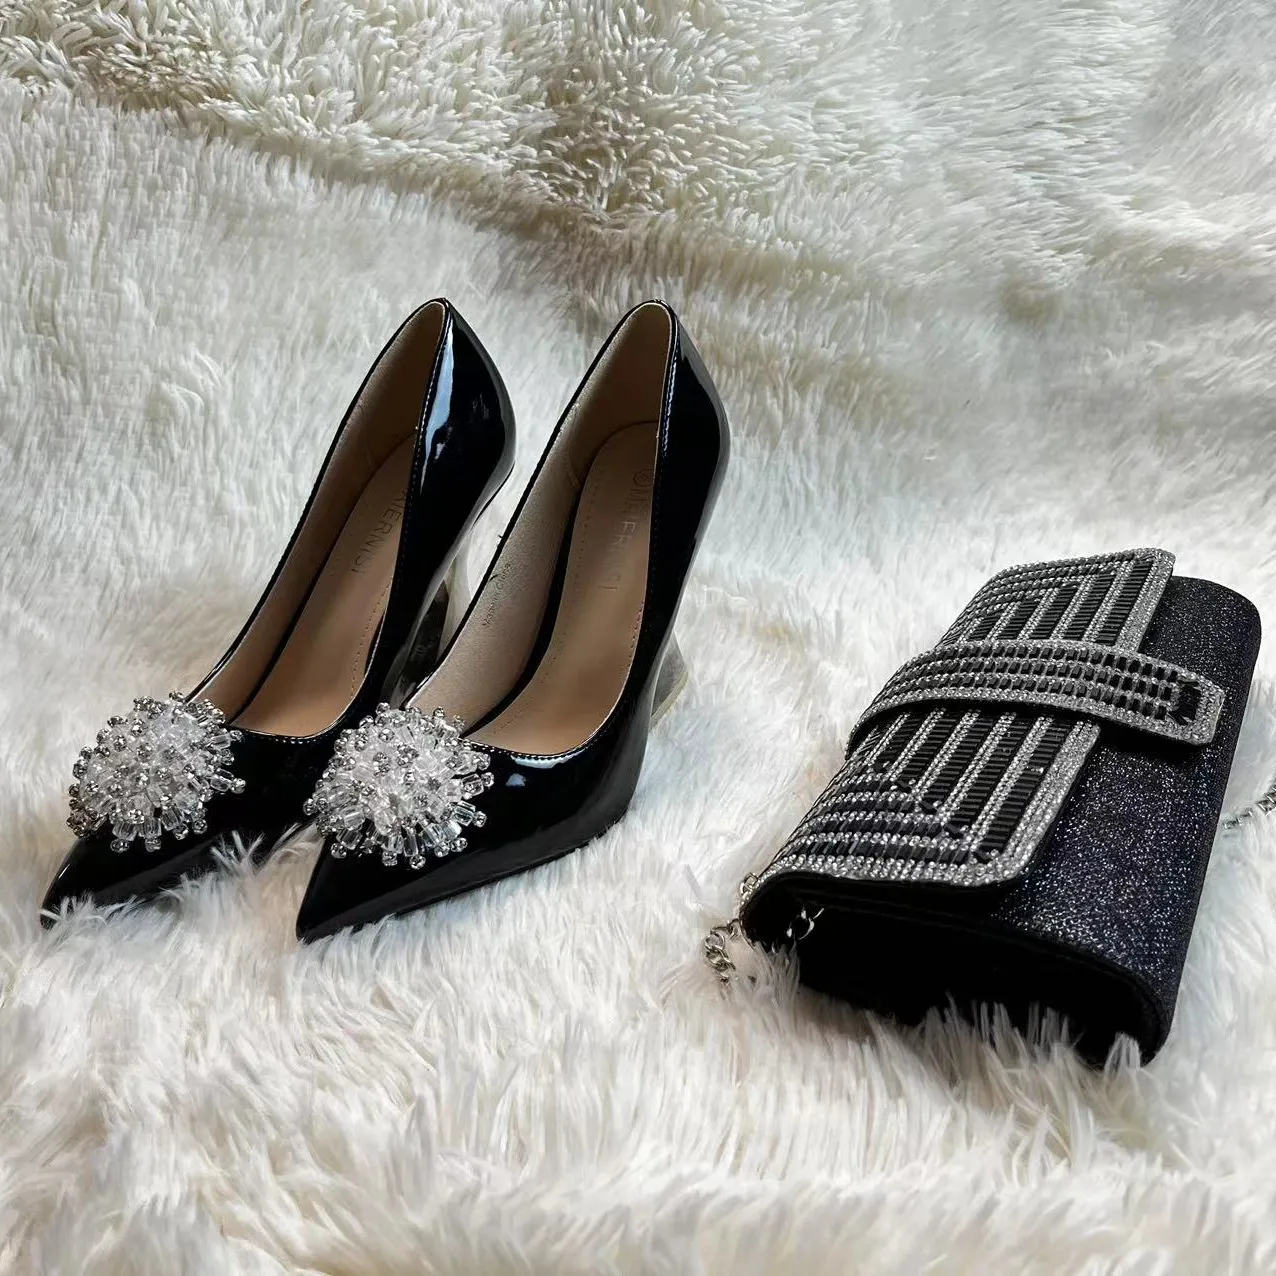 Newest Dance Shoes And Bag Set 8 CM High Heels With Clutch Bag For Women Wedding Shoes And Bag Set Wth Top Quality Bow Heels